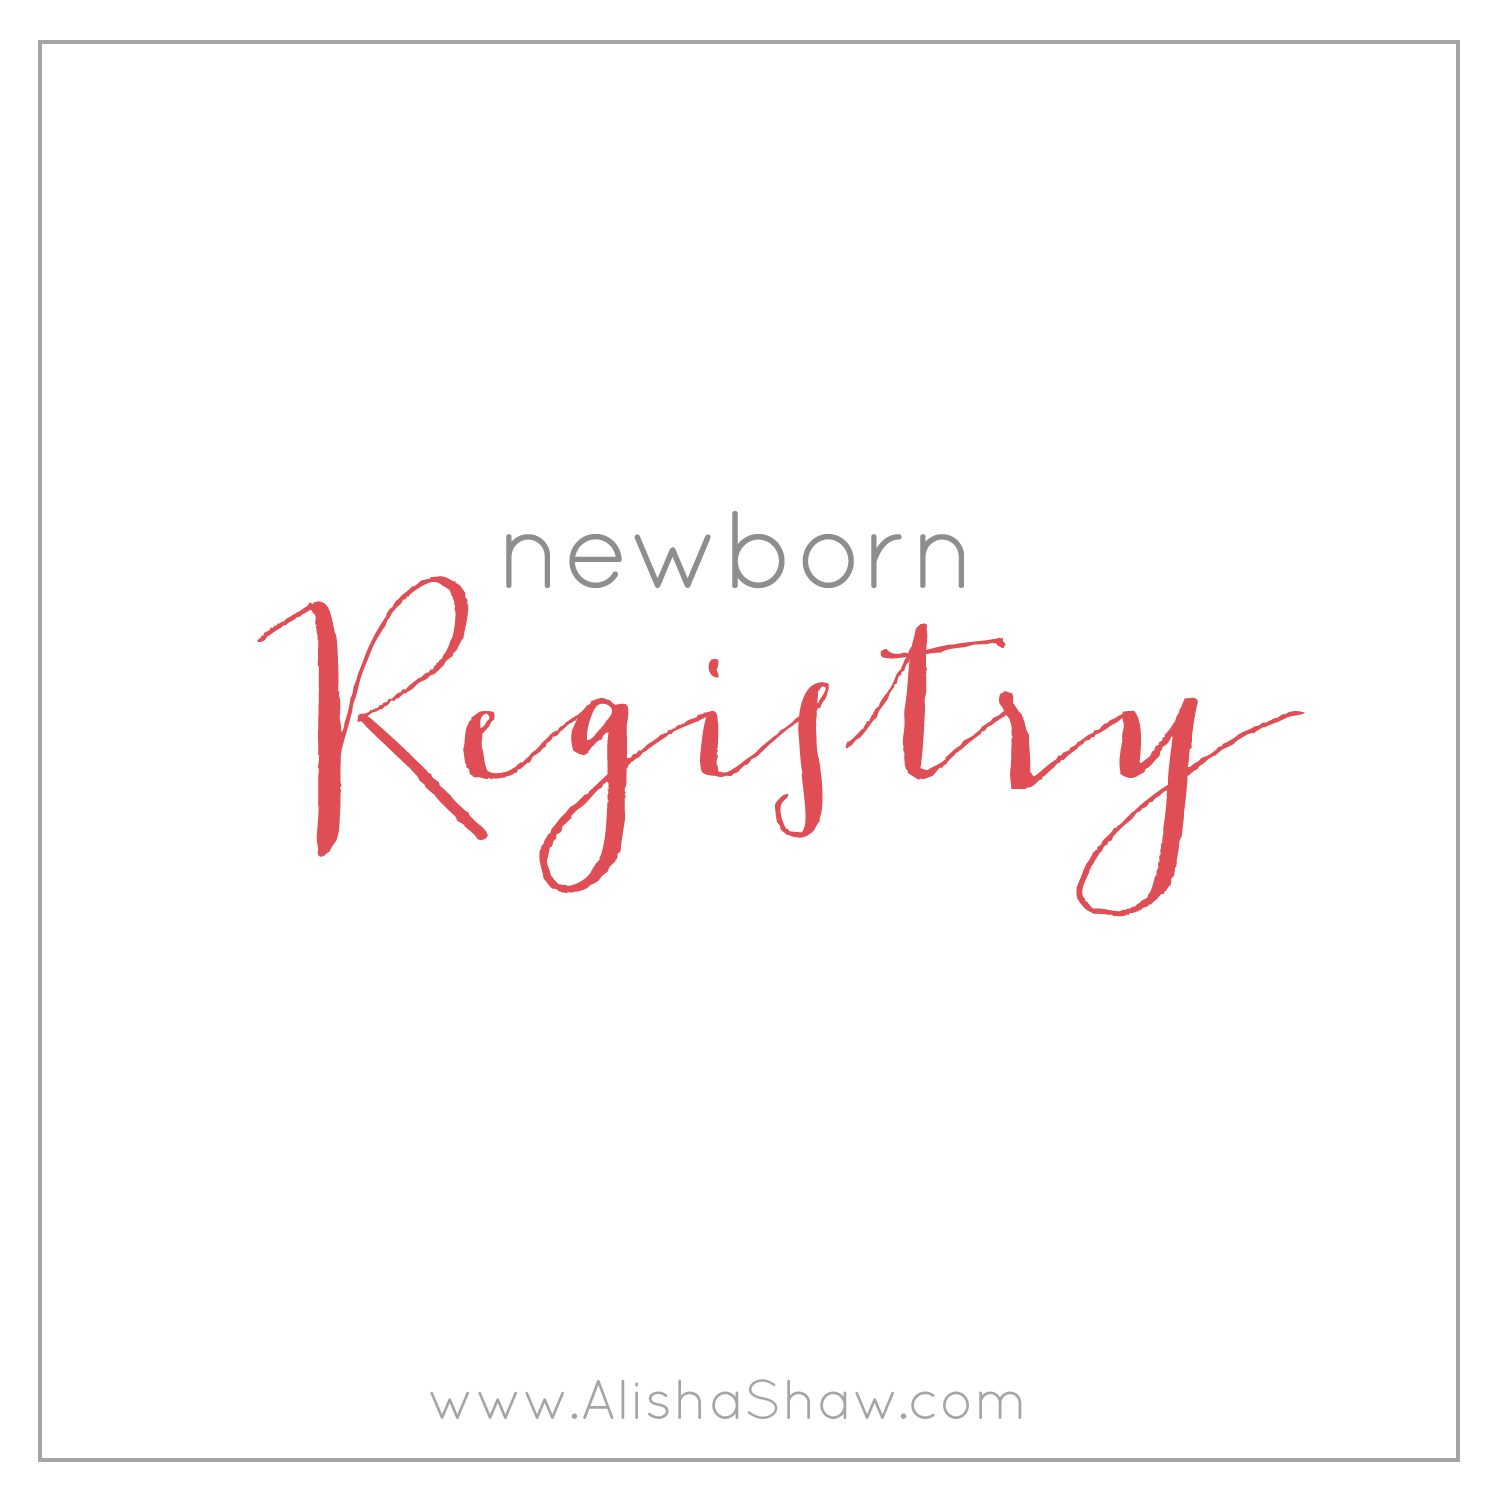 Newborn Registry Now Available